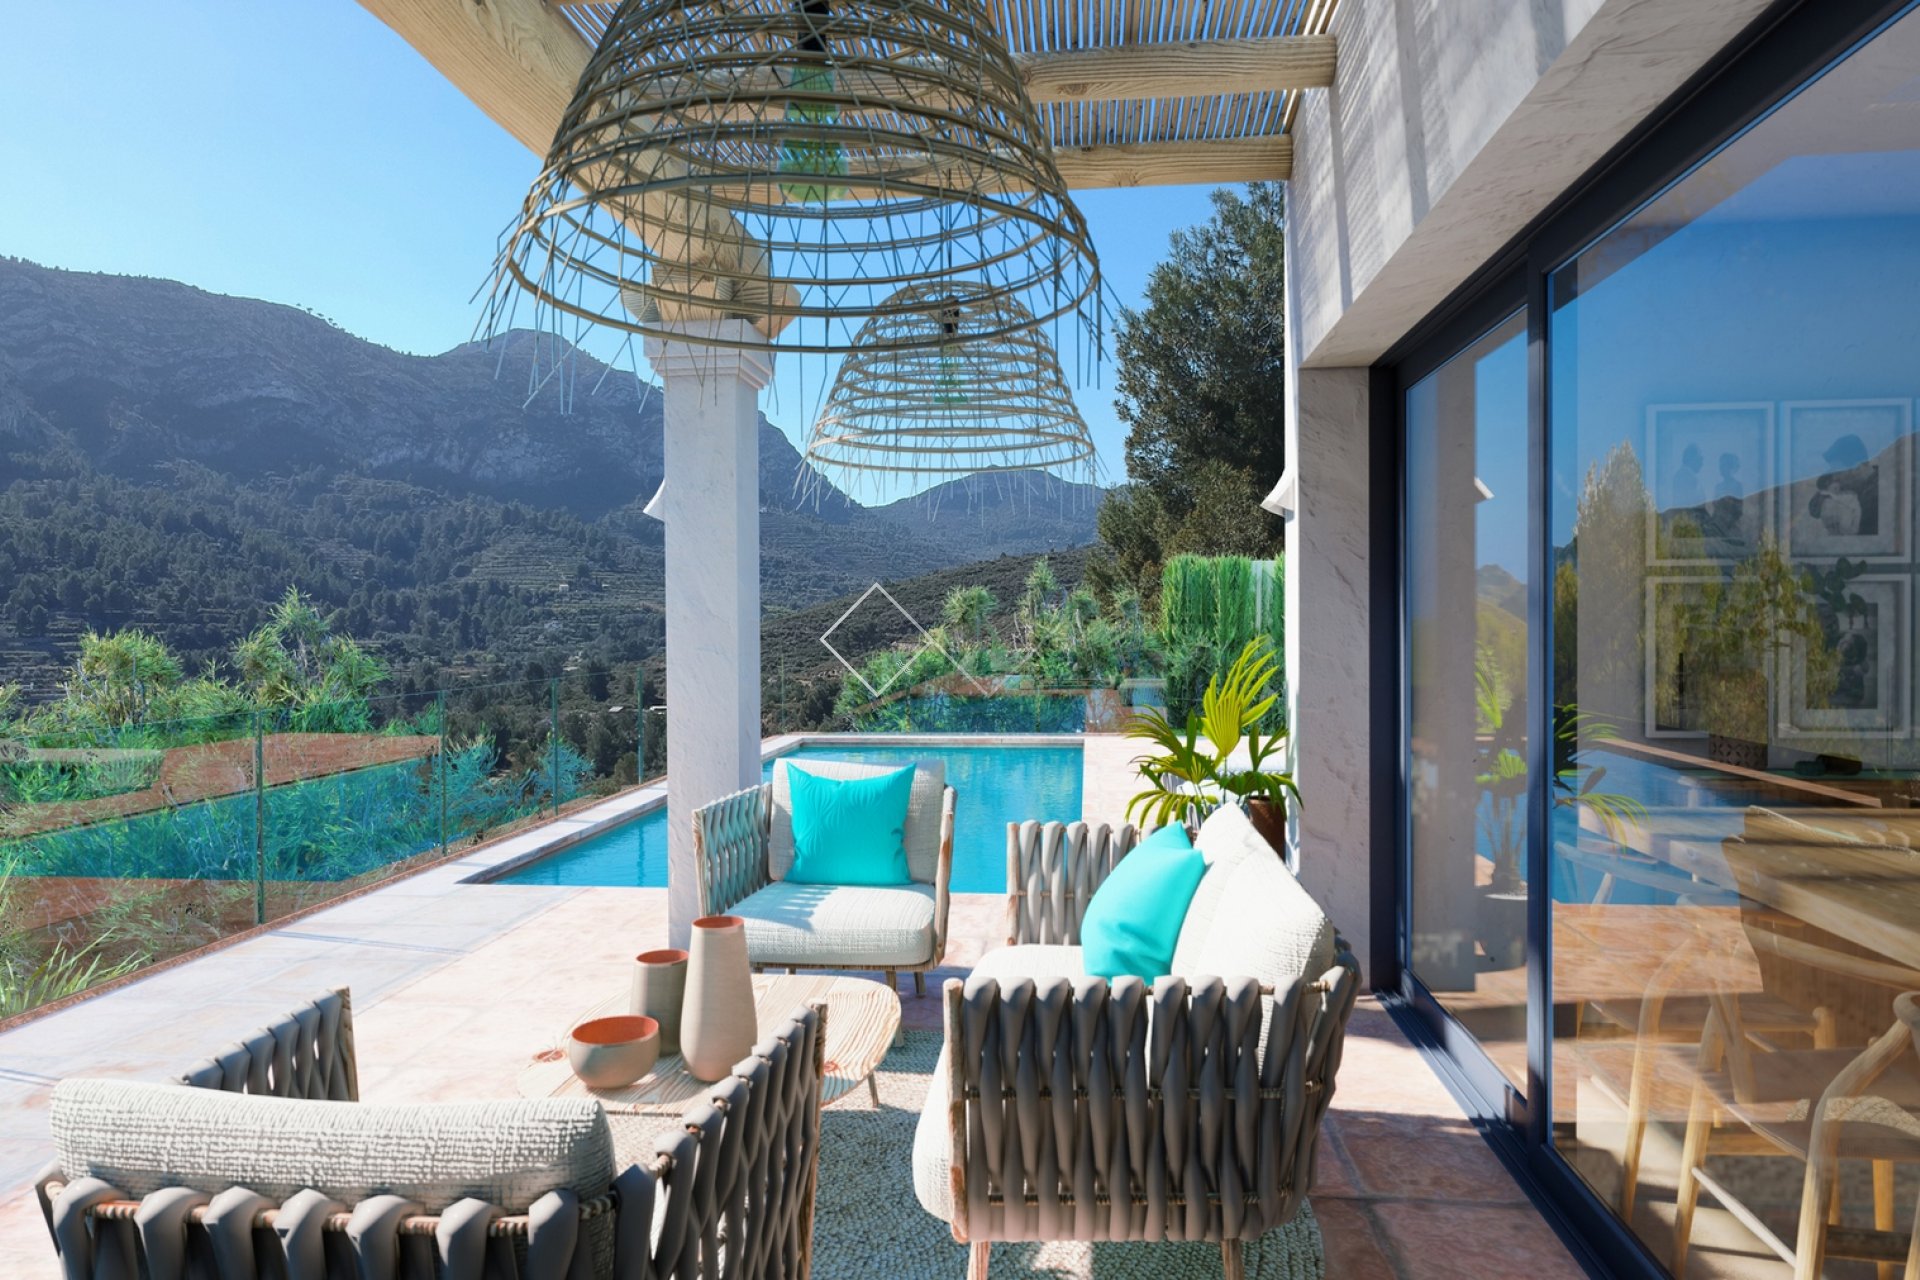 pool with mountain views - New villa for sale in Pedreguer, Ibiza-style